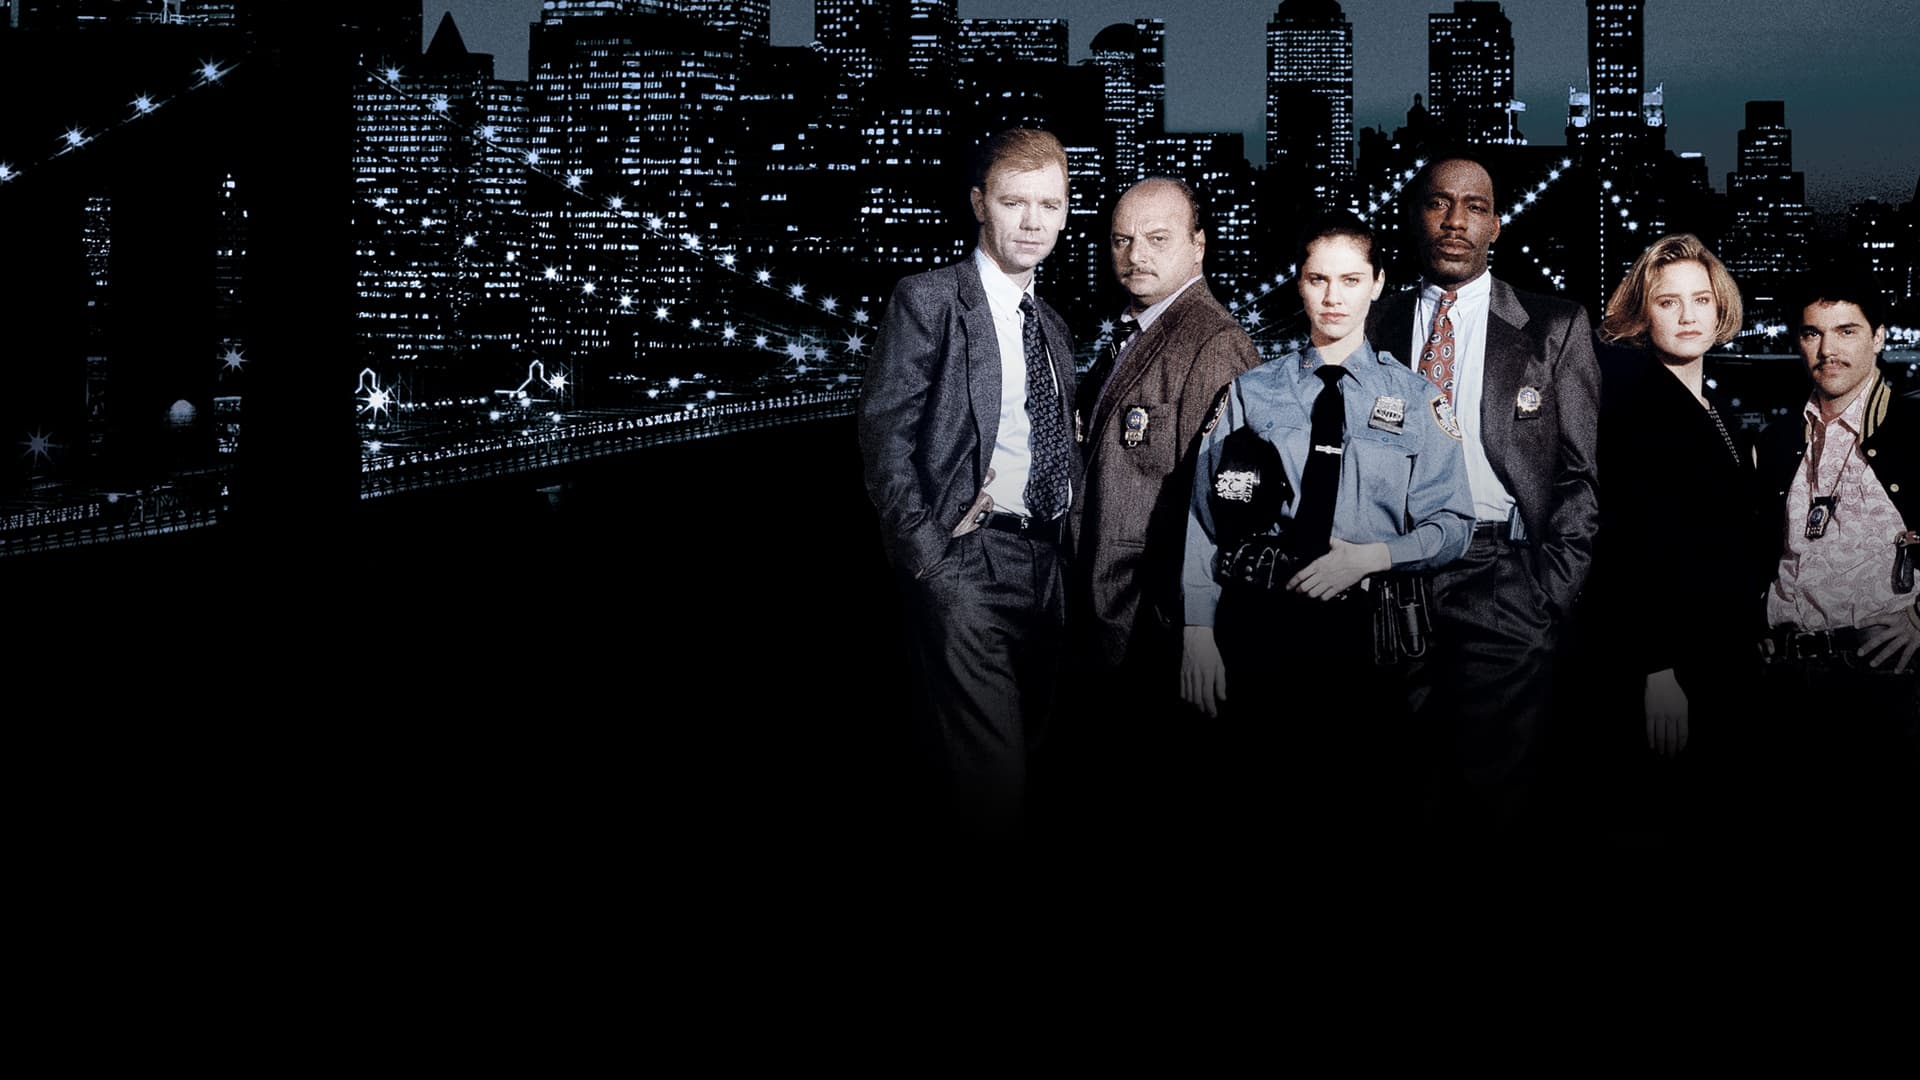 NYPD Blue 1993 123movies